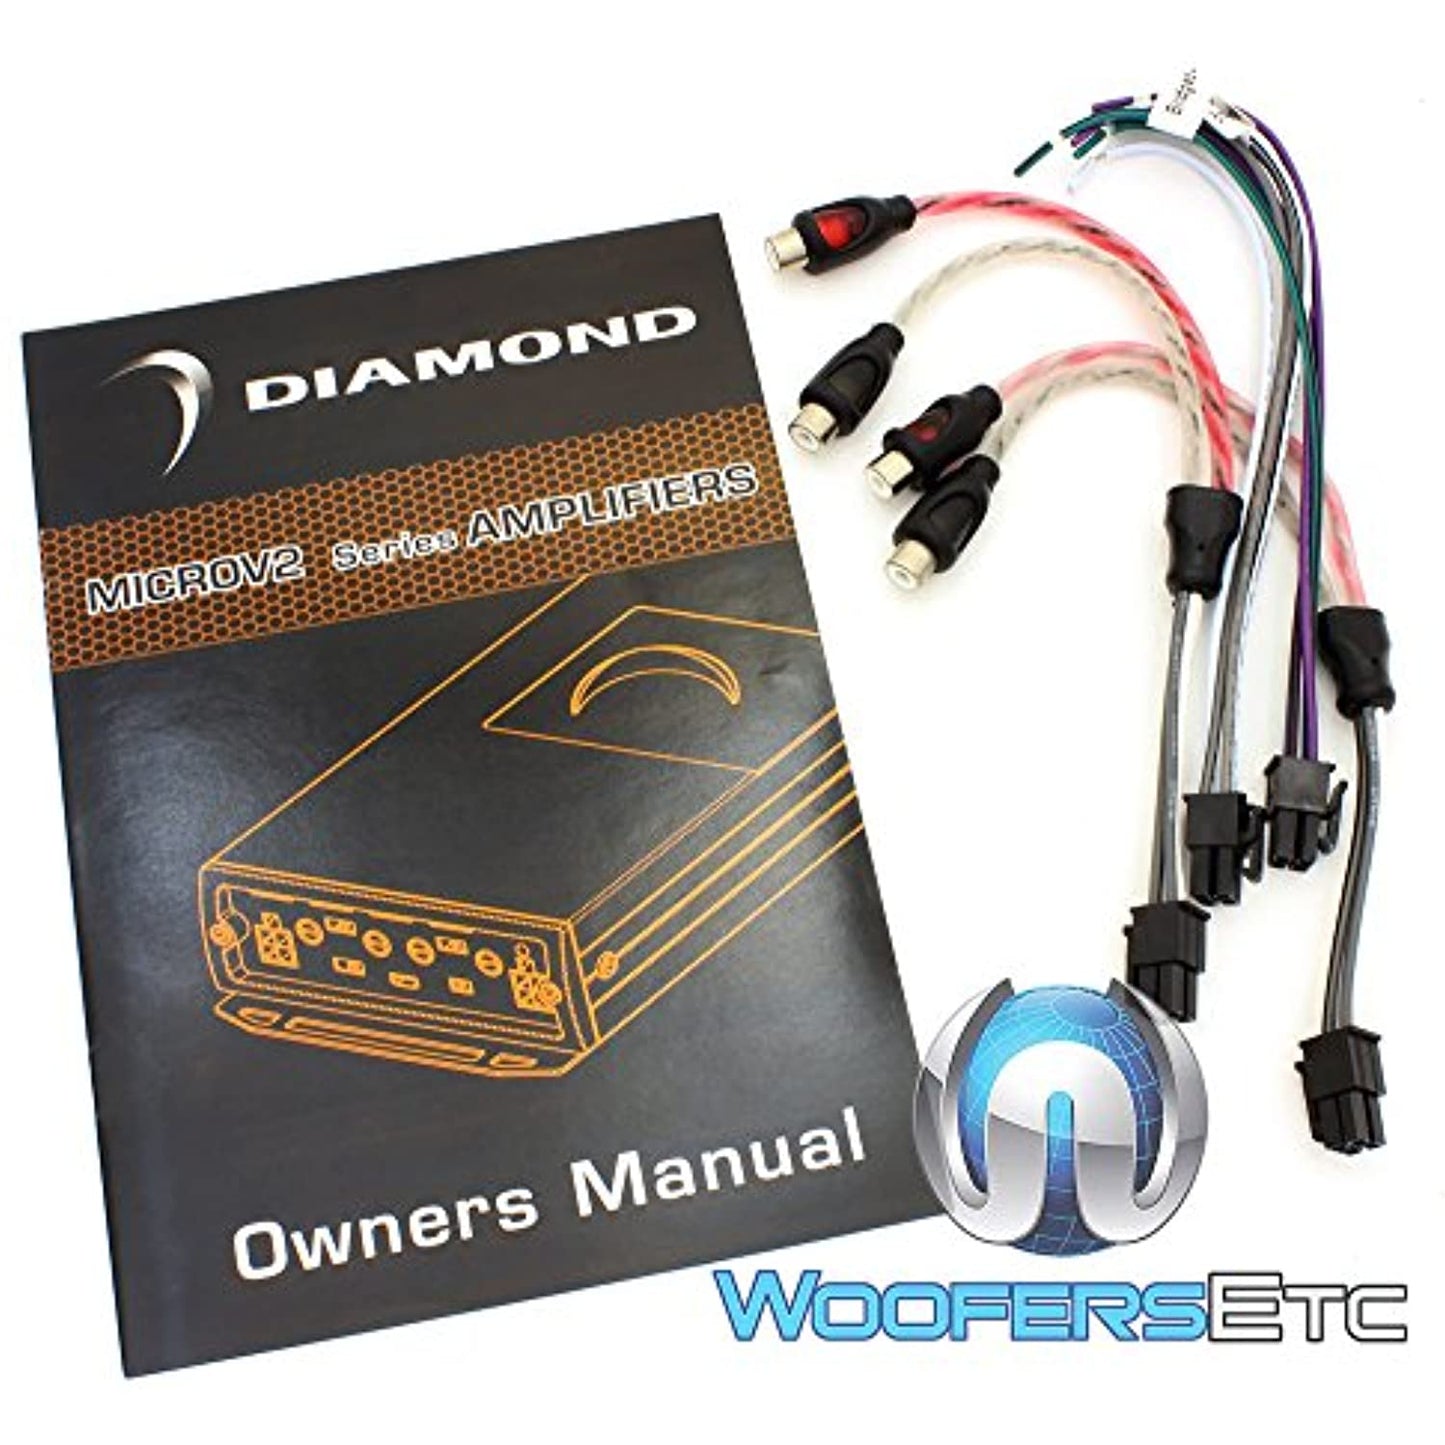 MICRO4V2 4-CHANNEL MOTORCYCLE 600W RMS 4-CH AMPLIFIER FOR HARLEY + V10-D104K